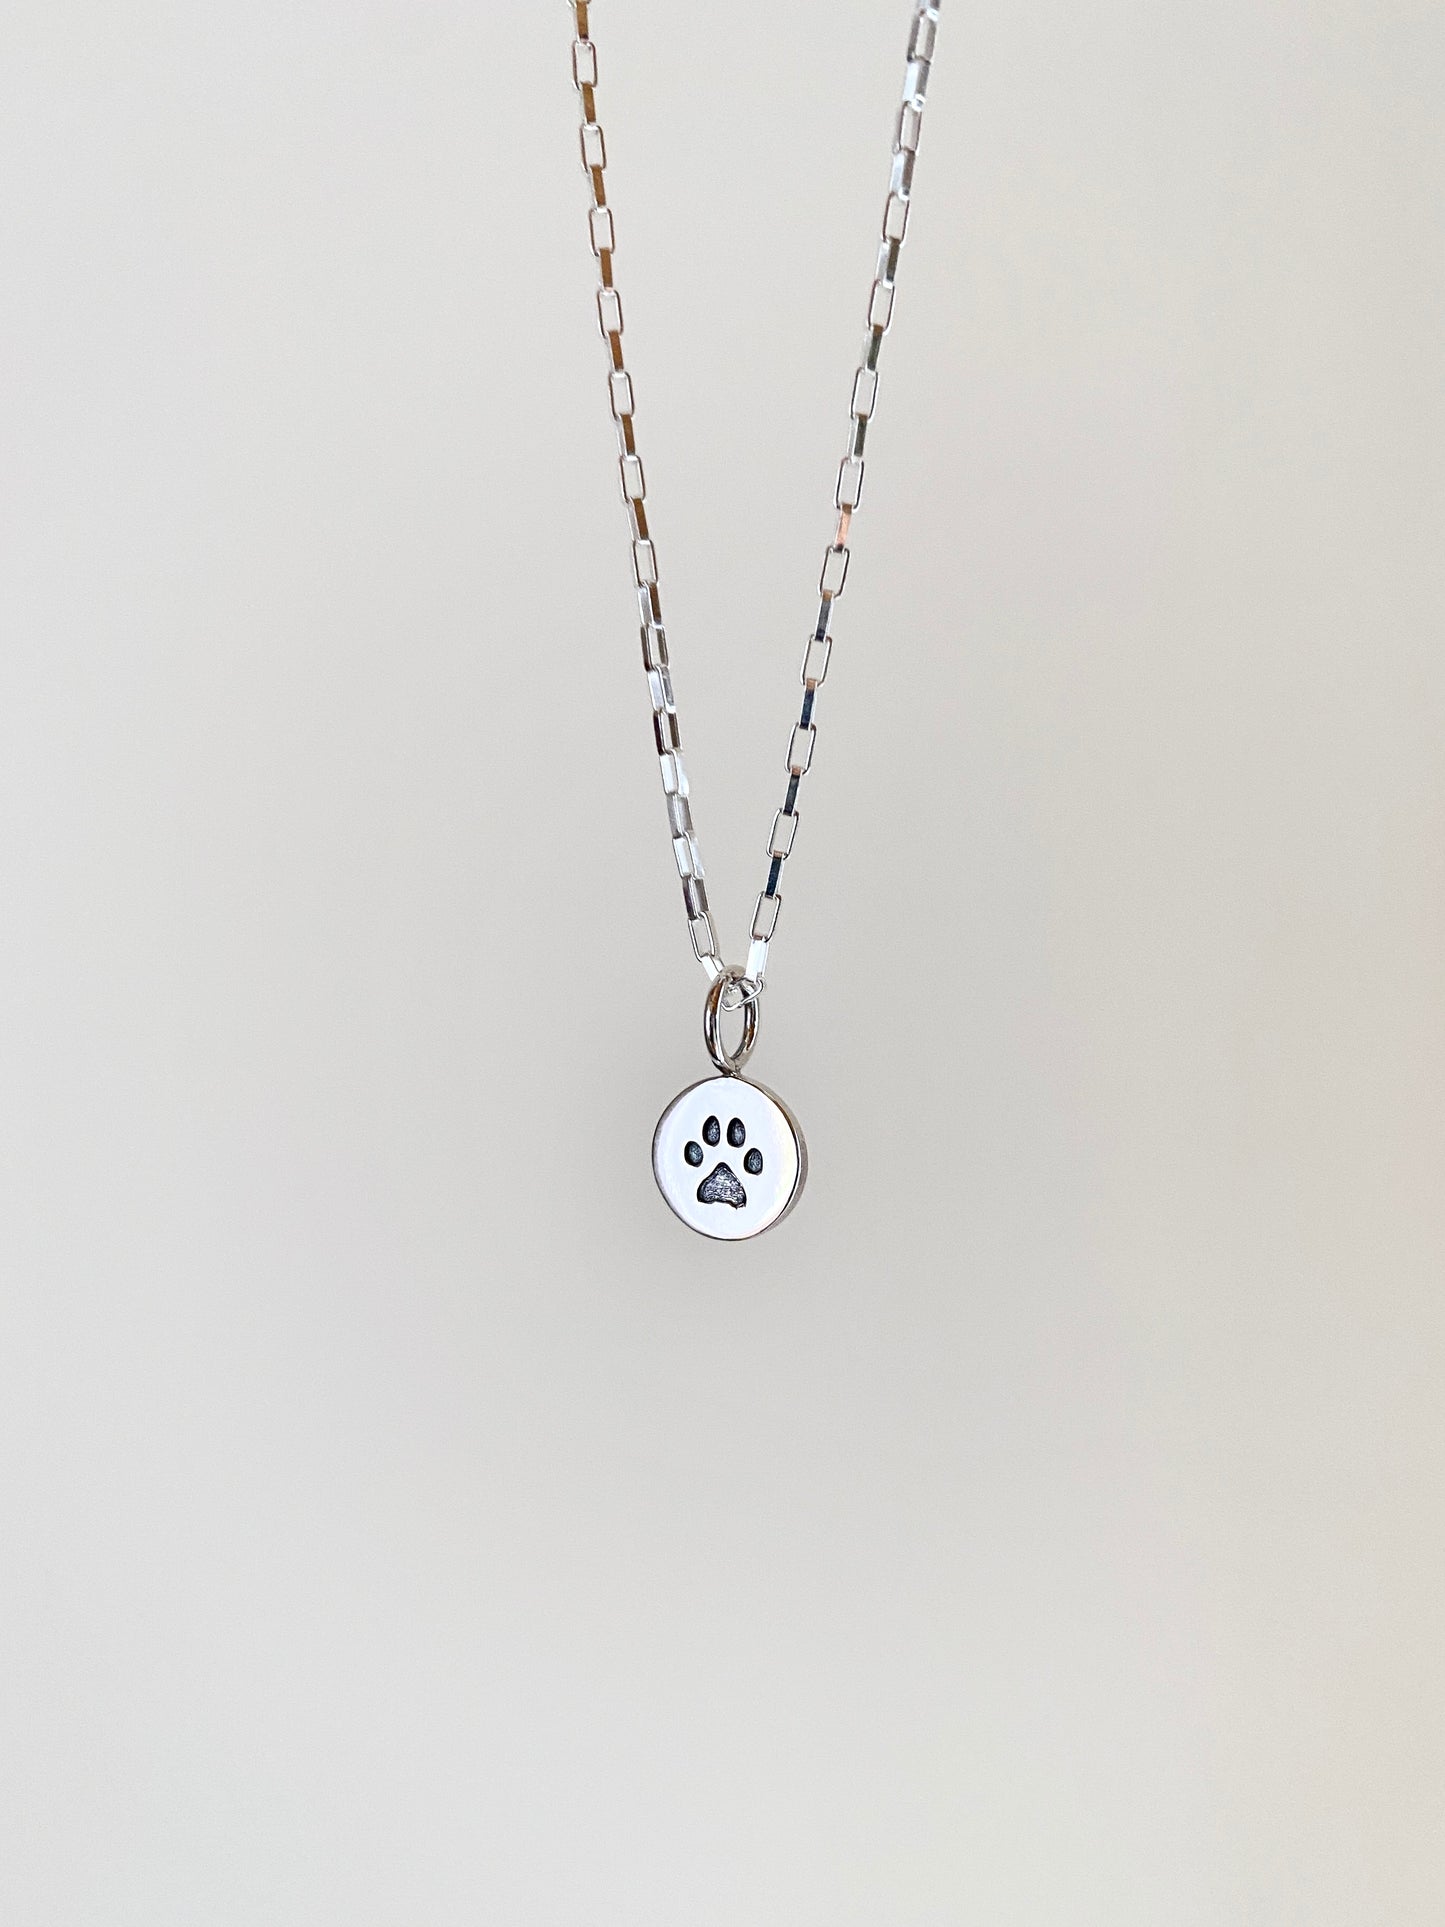 Paw Print ~ Sterling Silver 18 inch Charm Necklace - Sacred Symbols Series